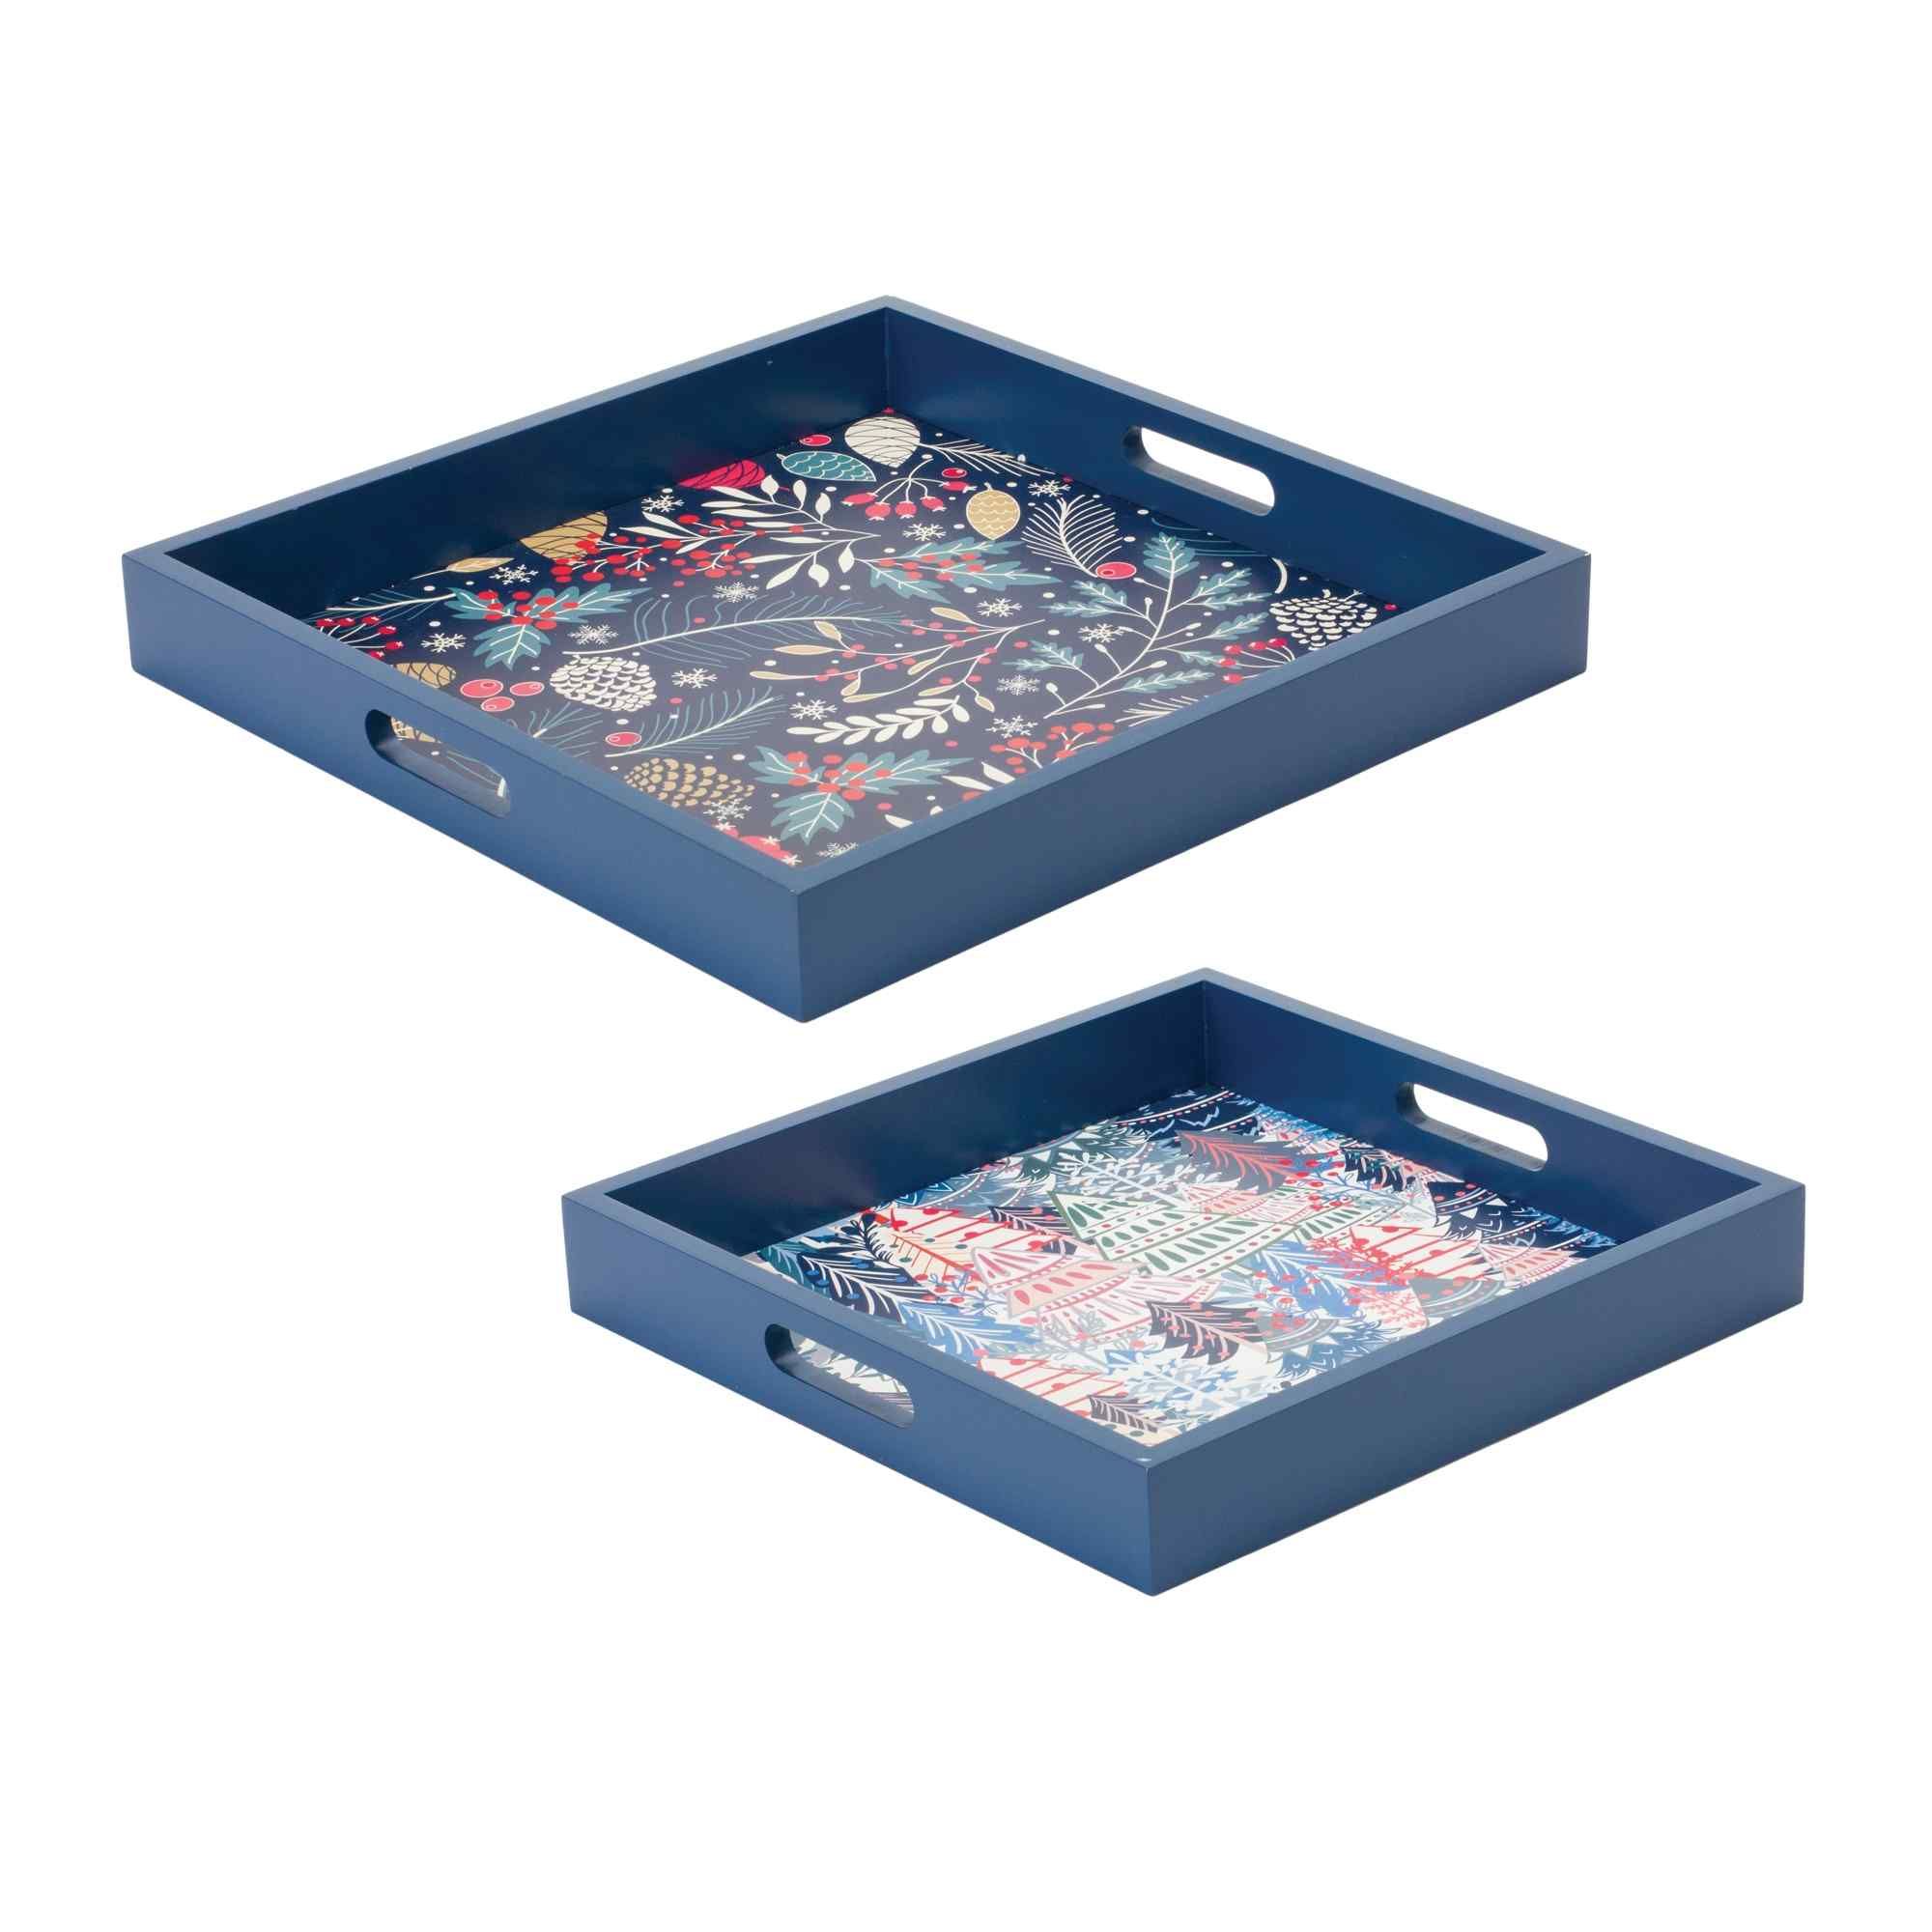 Melrose Set of 2 Blue and Red Berry with Pine Tree Christmas Decorative Trays 15.75"